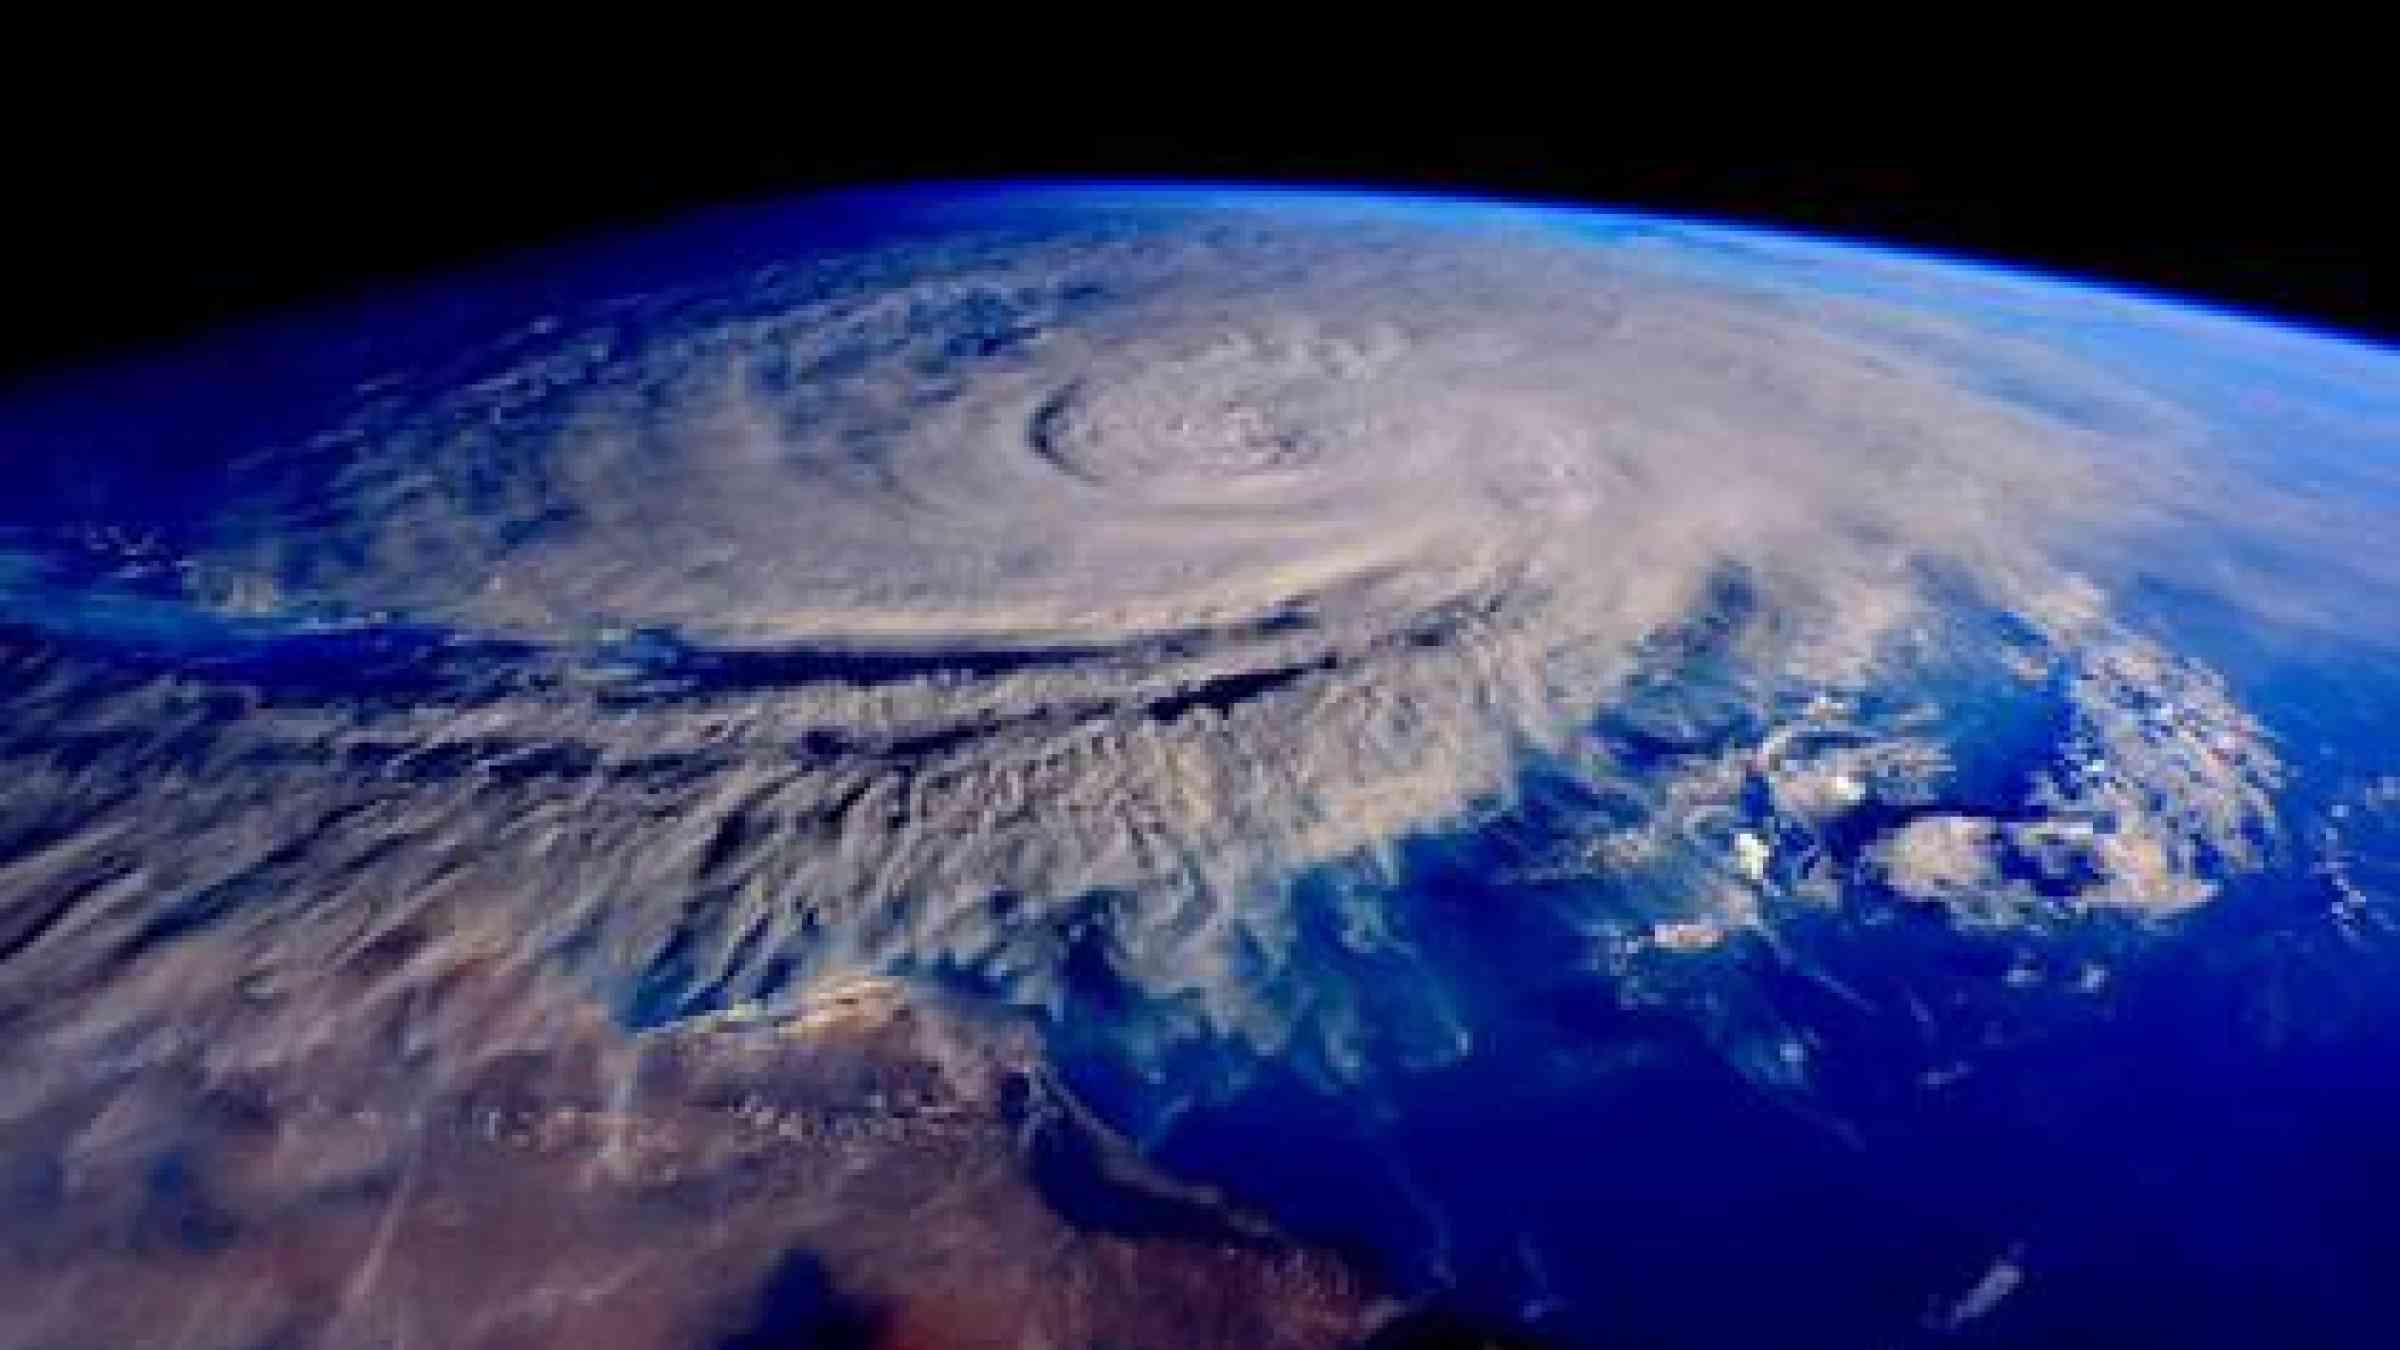 A view of Cyclone Chapala from the International Space Station on October 31, 2015. (Photo: Scott Kelly/ EPA)